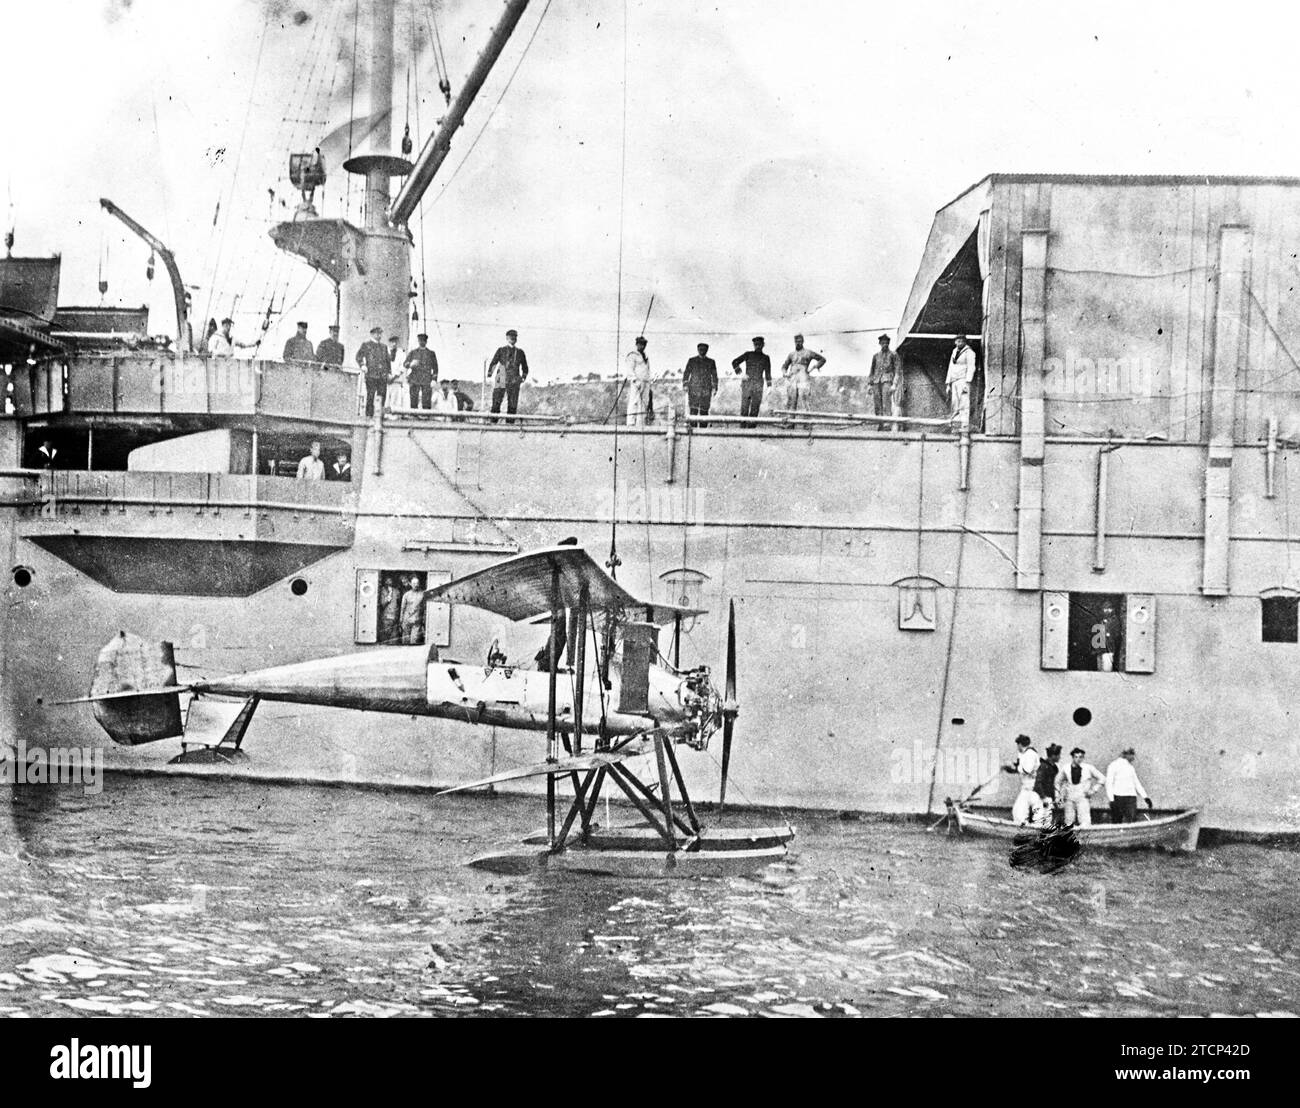 11/30/1912. Maritime aviation in Villefranche. Hydroplane that daily performs flights in the roadstead and whose shed is installed on board the warship that is also seen in the engraving. Credit: Album / Archivo ABC / Louis Hugelmann Stock Photo